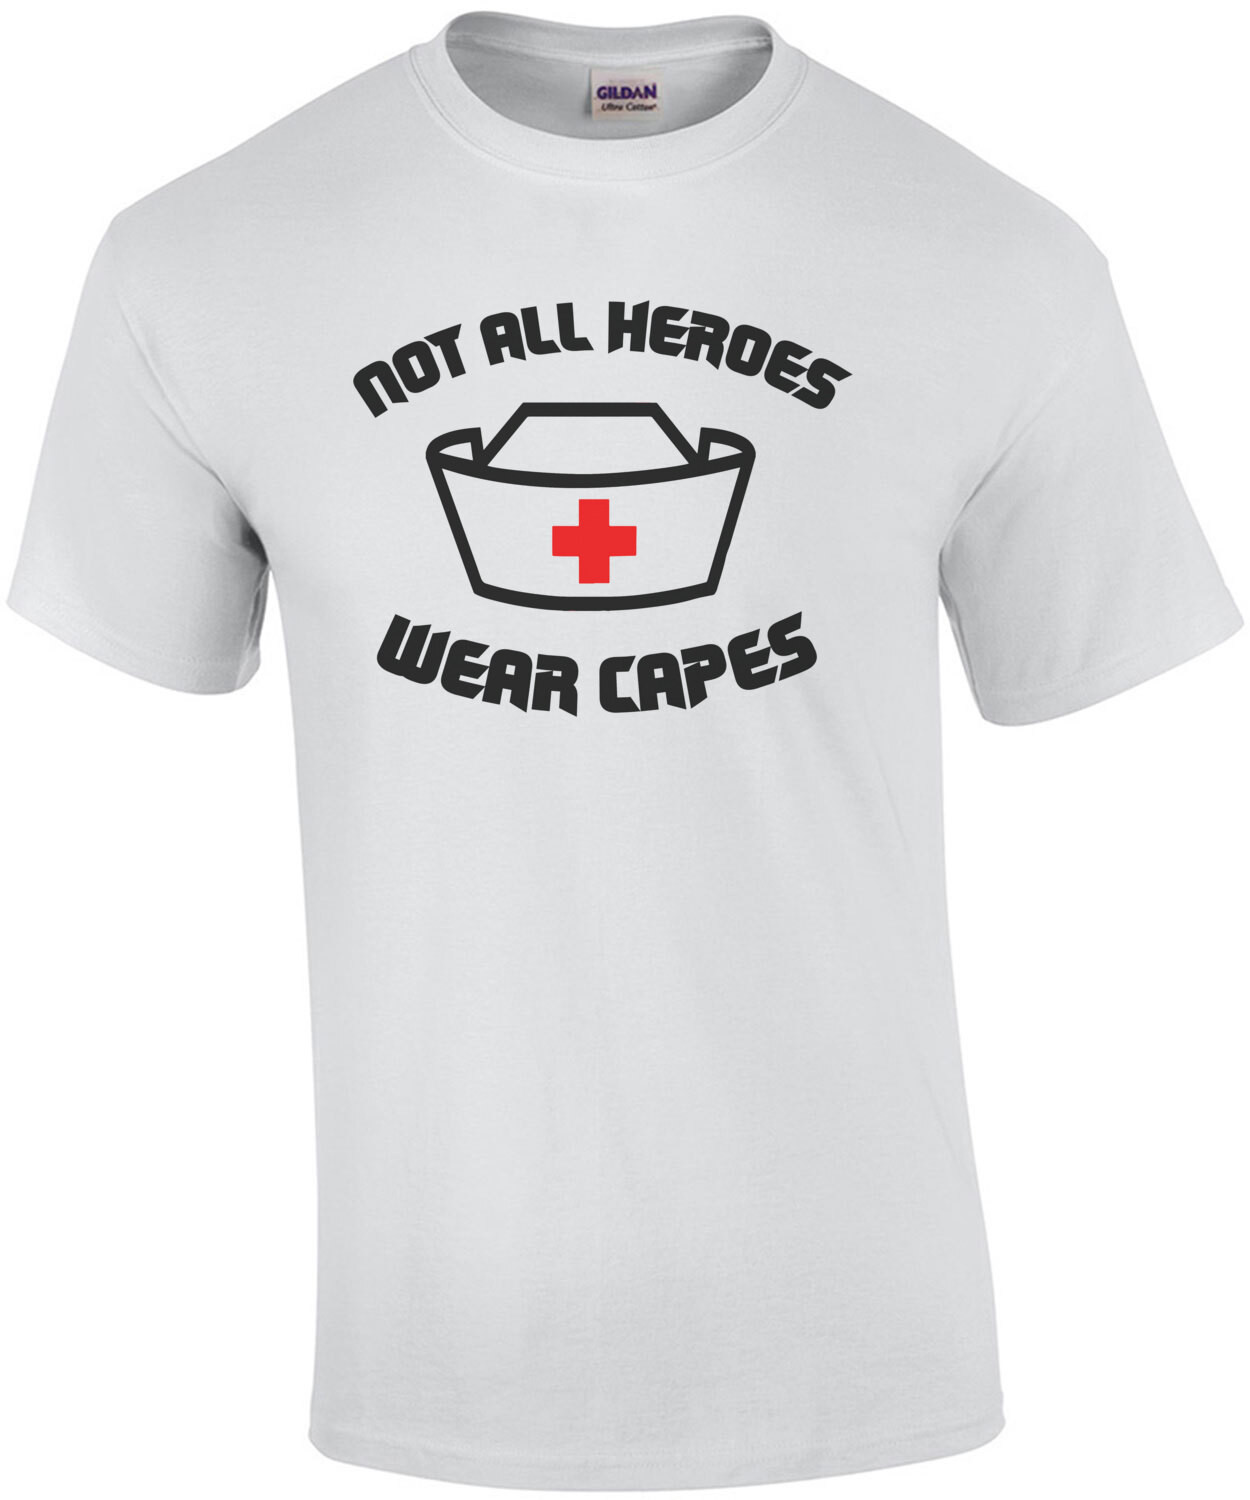 Not All Heroes Wear Capes - Nurse Shirt